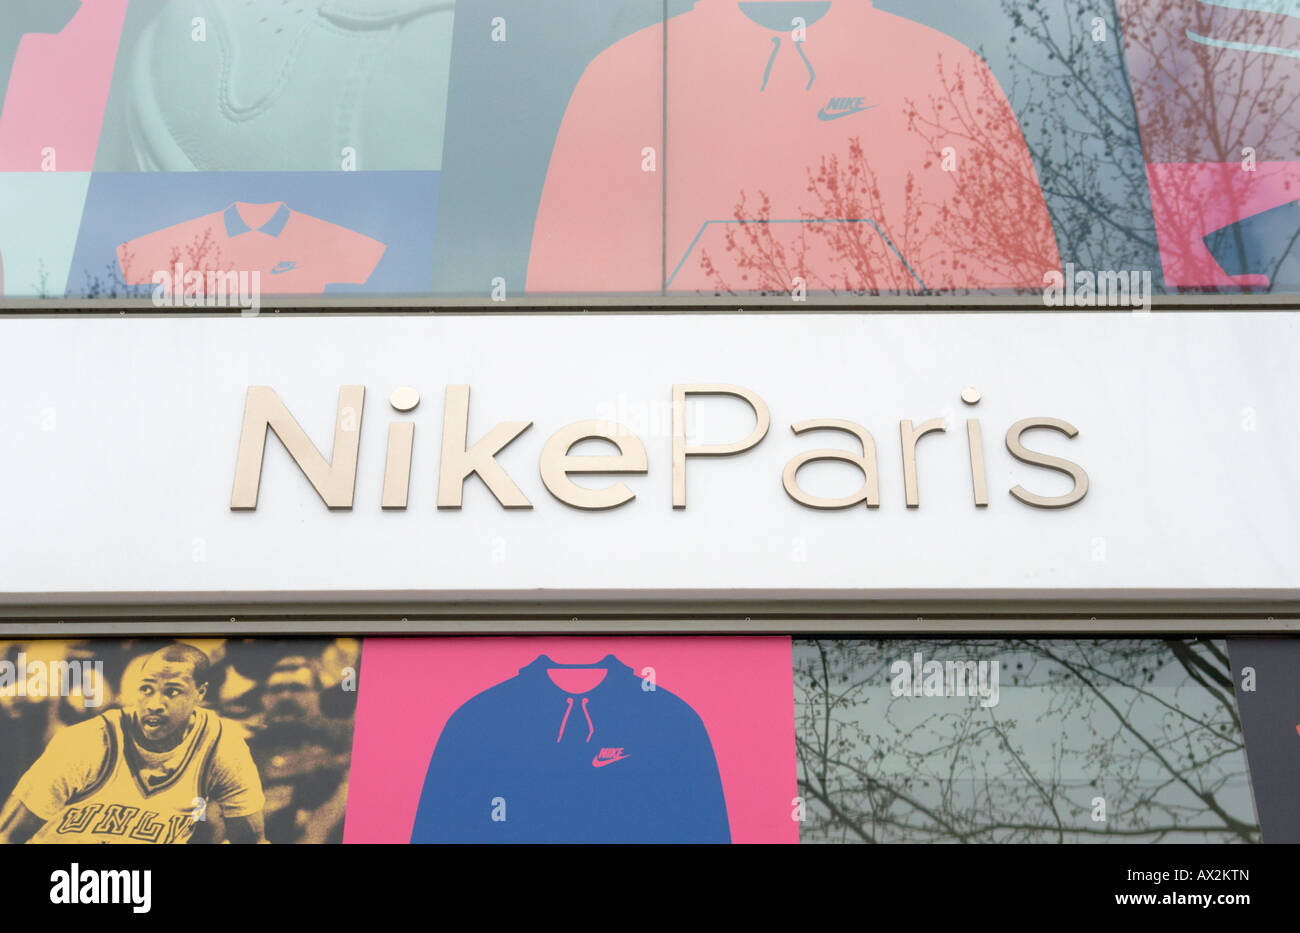 Nike Paris sign at the Nike store Champs Elysees Paris France Stock Photo -  Alamy